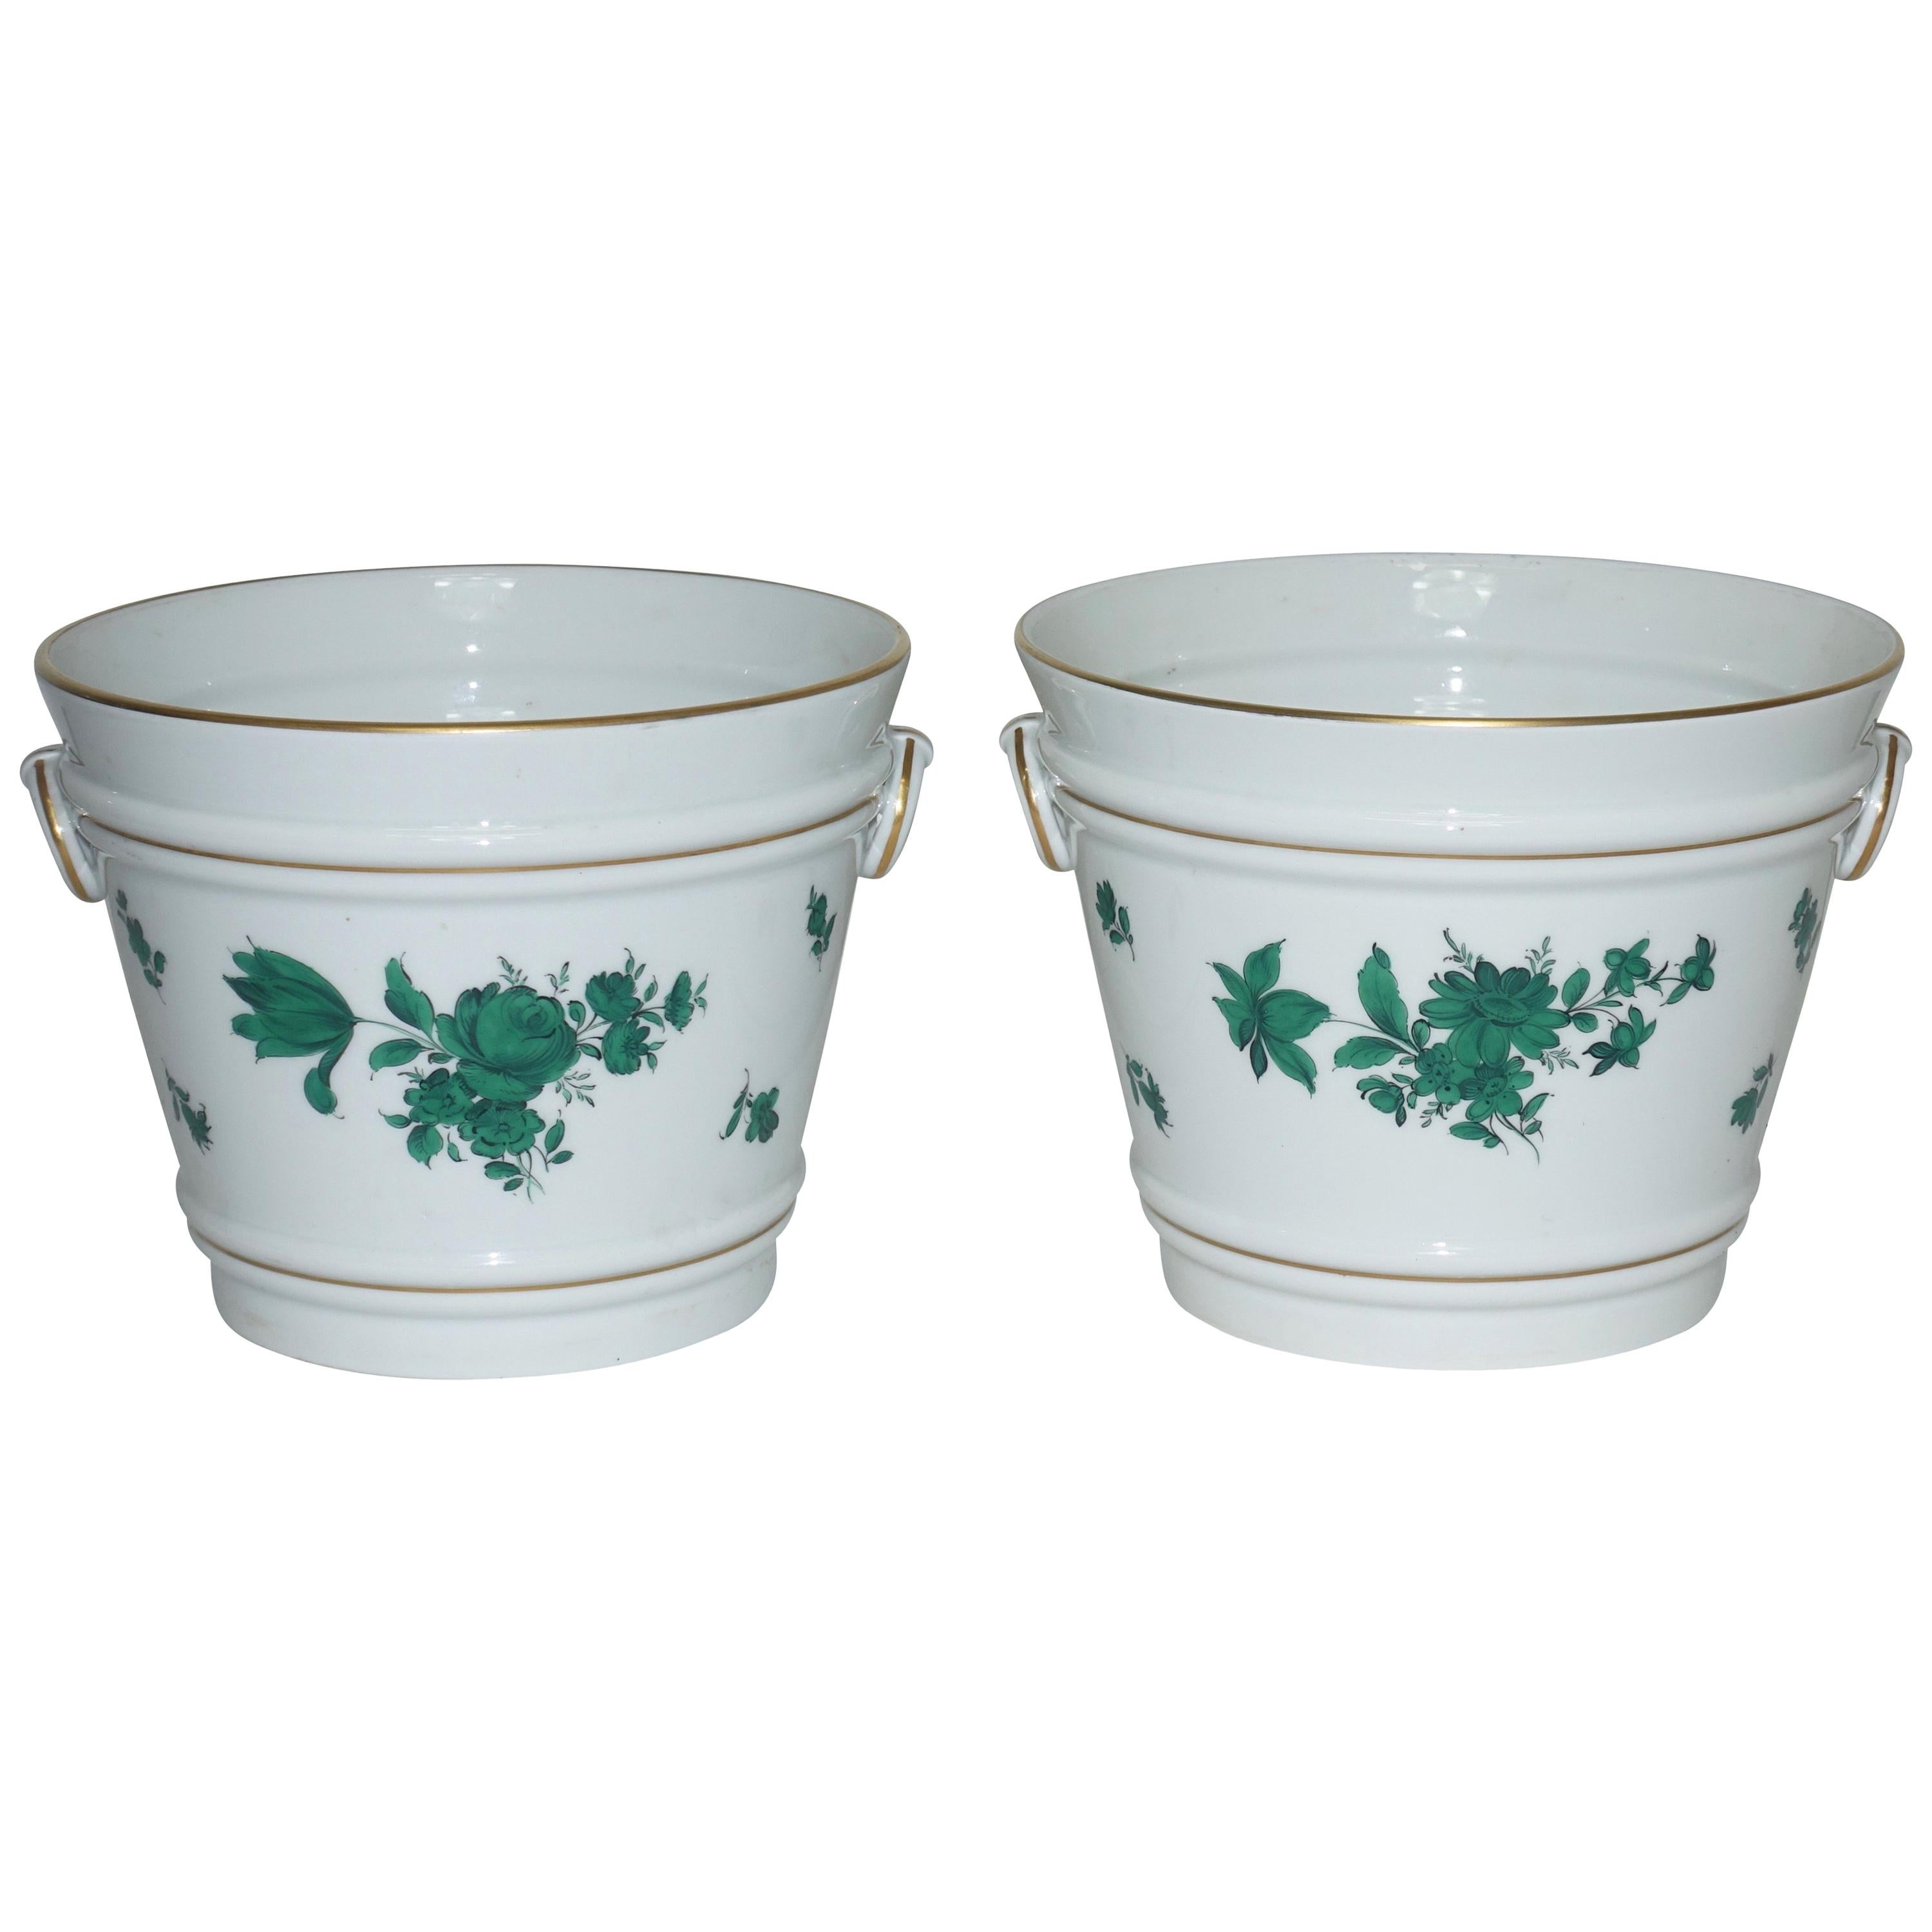 Pair of Hand-Painted Porcelain Cachepots, Vienna, 19th Century